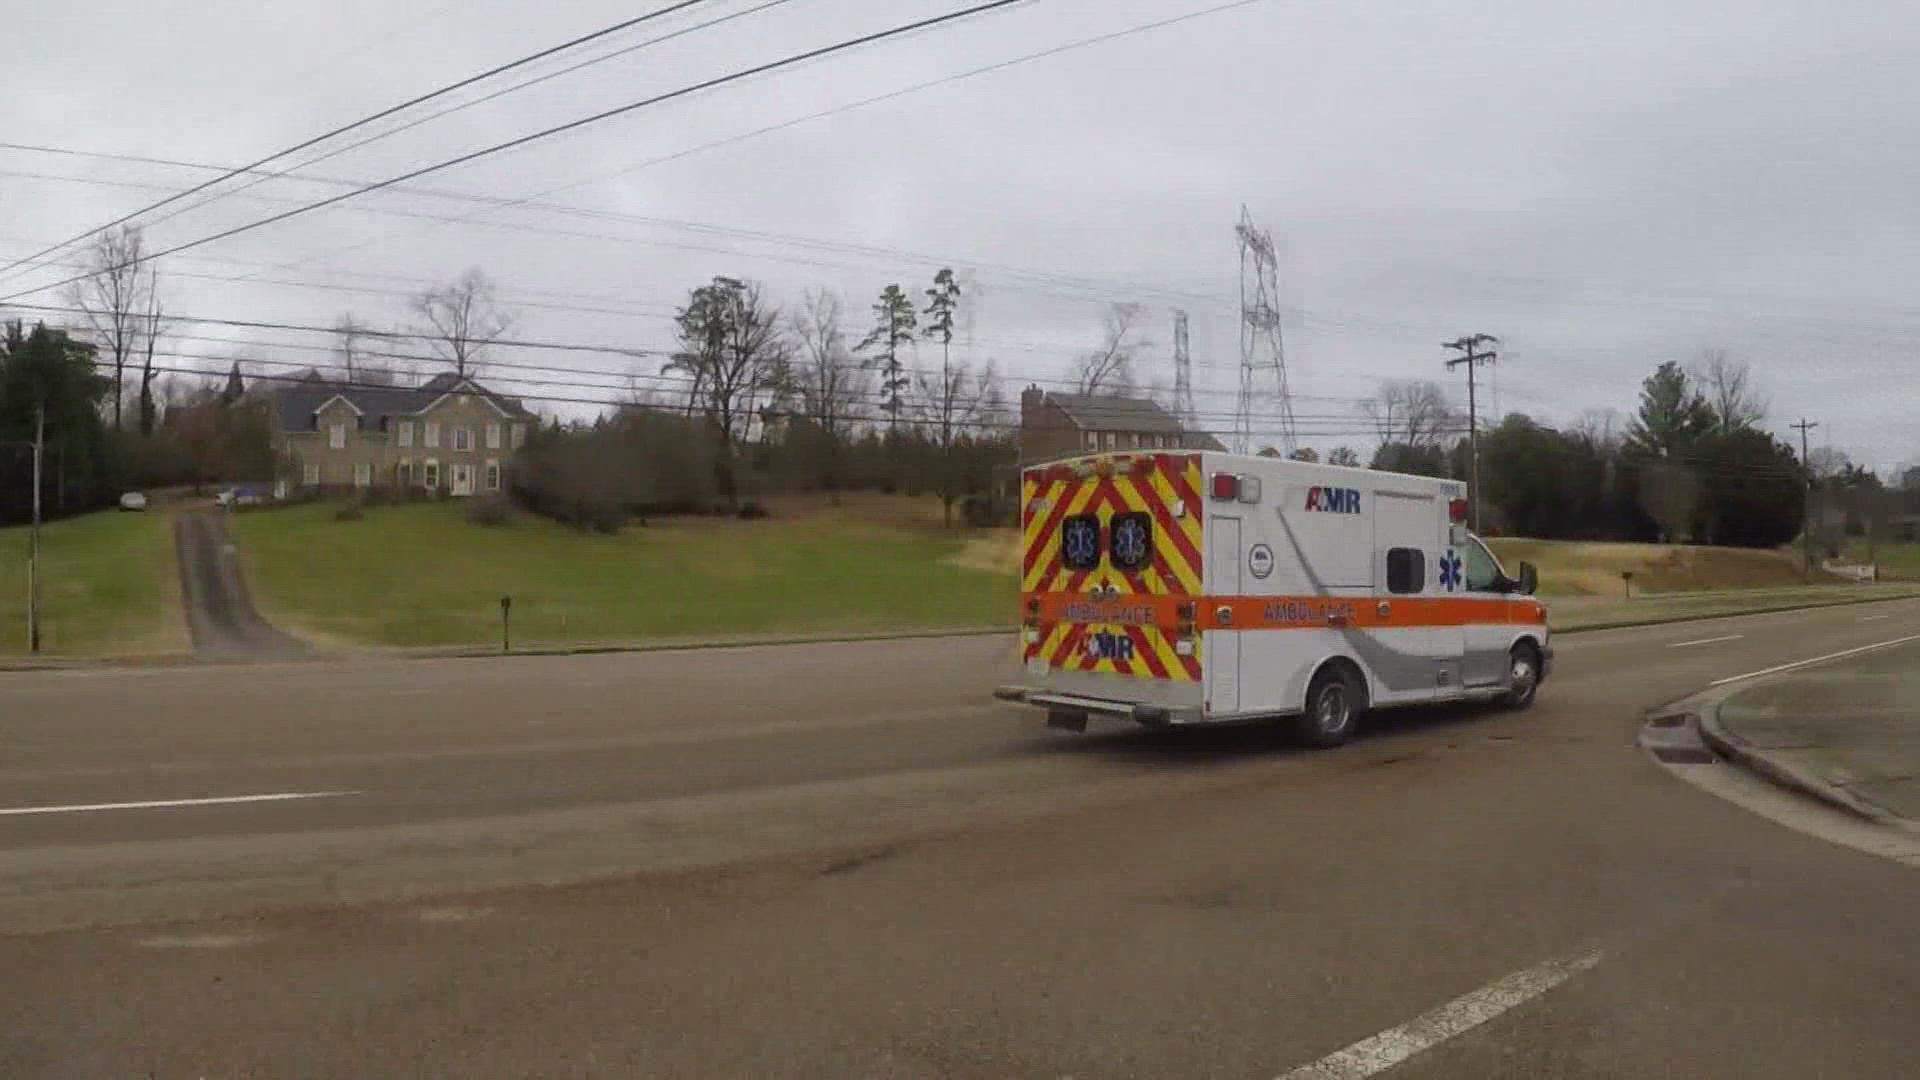 The ambulance was traveling northbound on Alcoa Highway towards the UT Medical Center when the driver struck a pedestrian, according to the City of Alcoa.